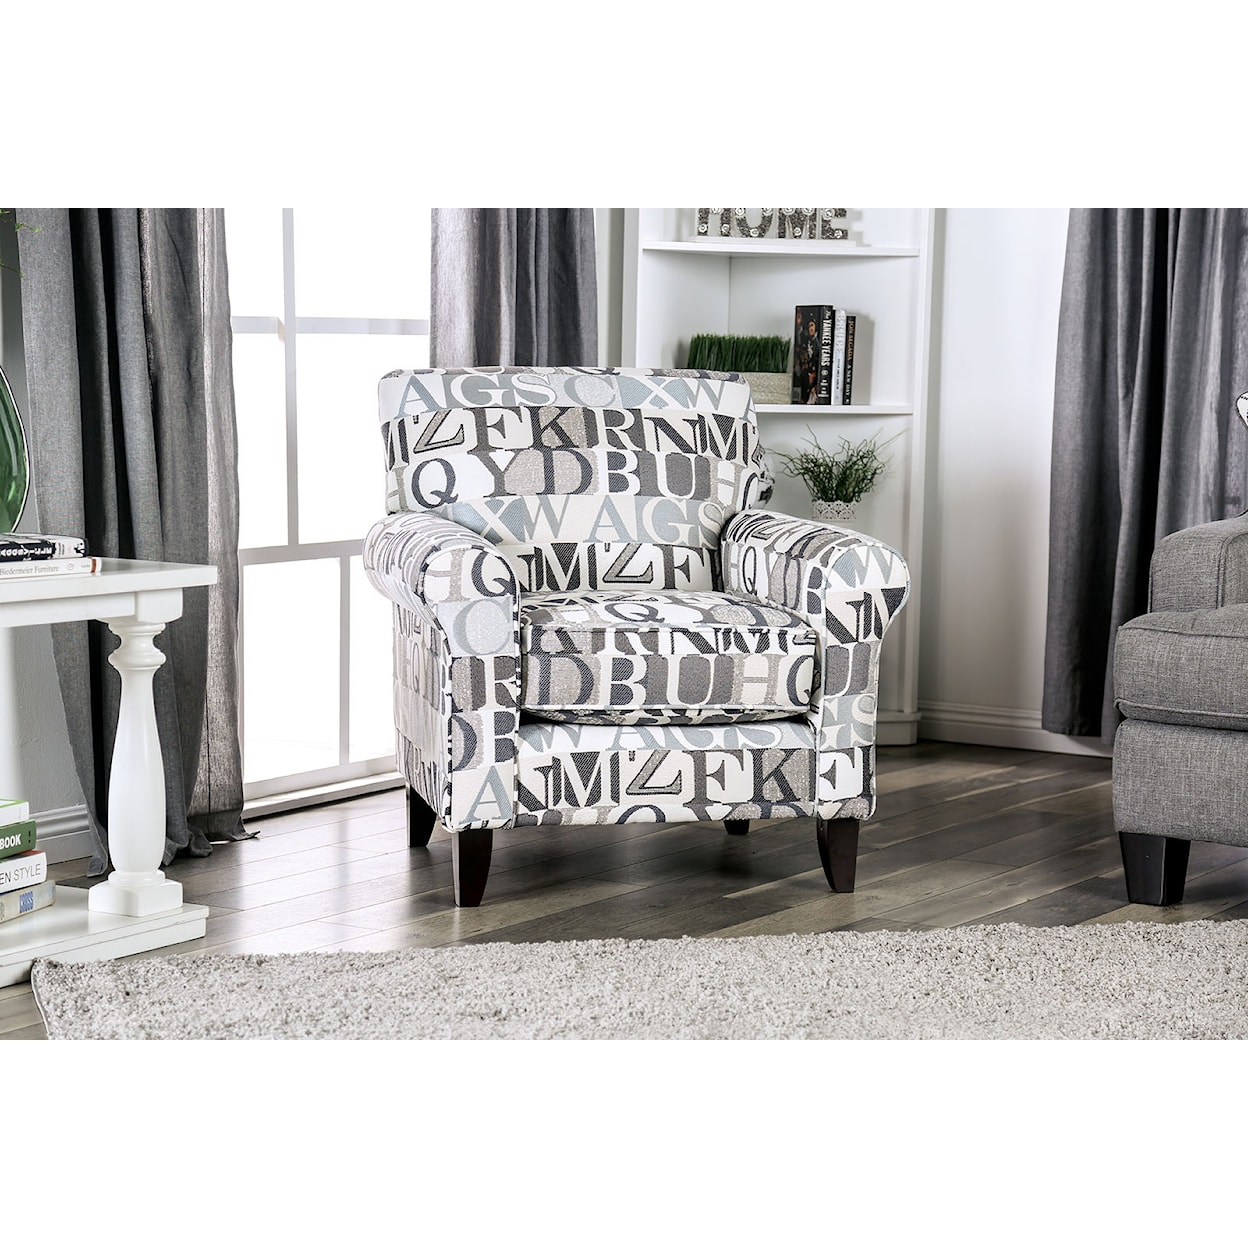 Furniture of America Verne Chair, Letters